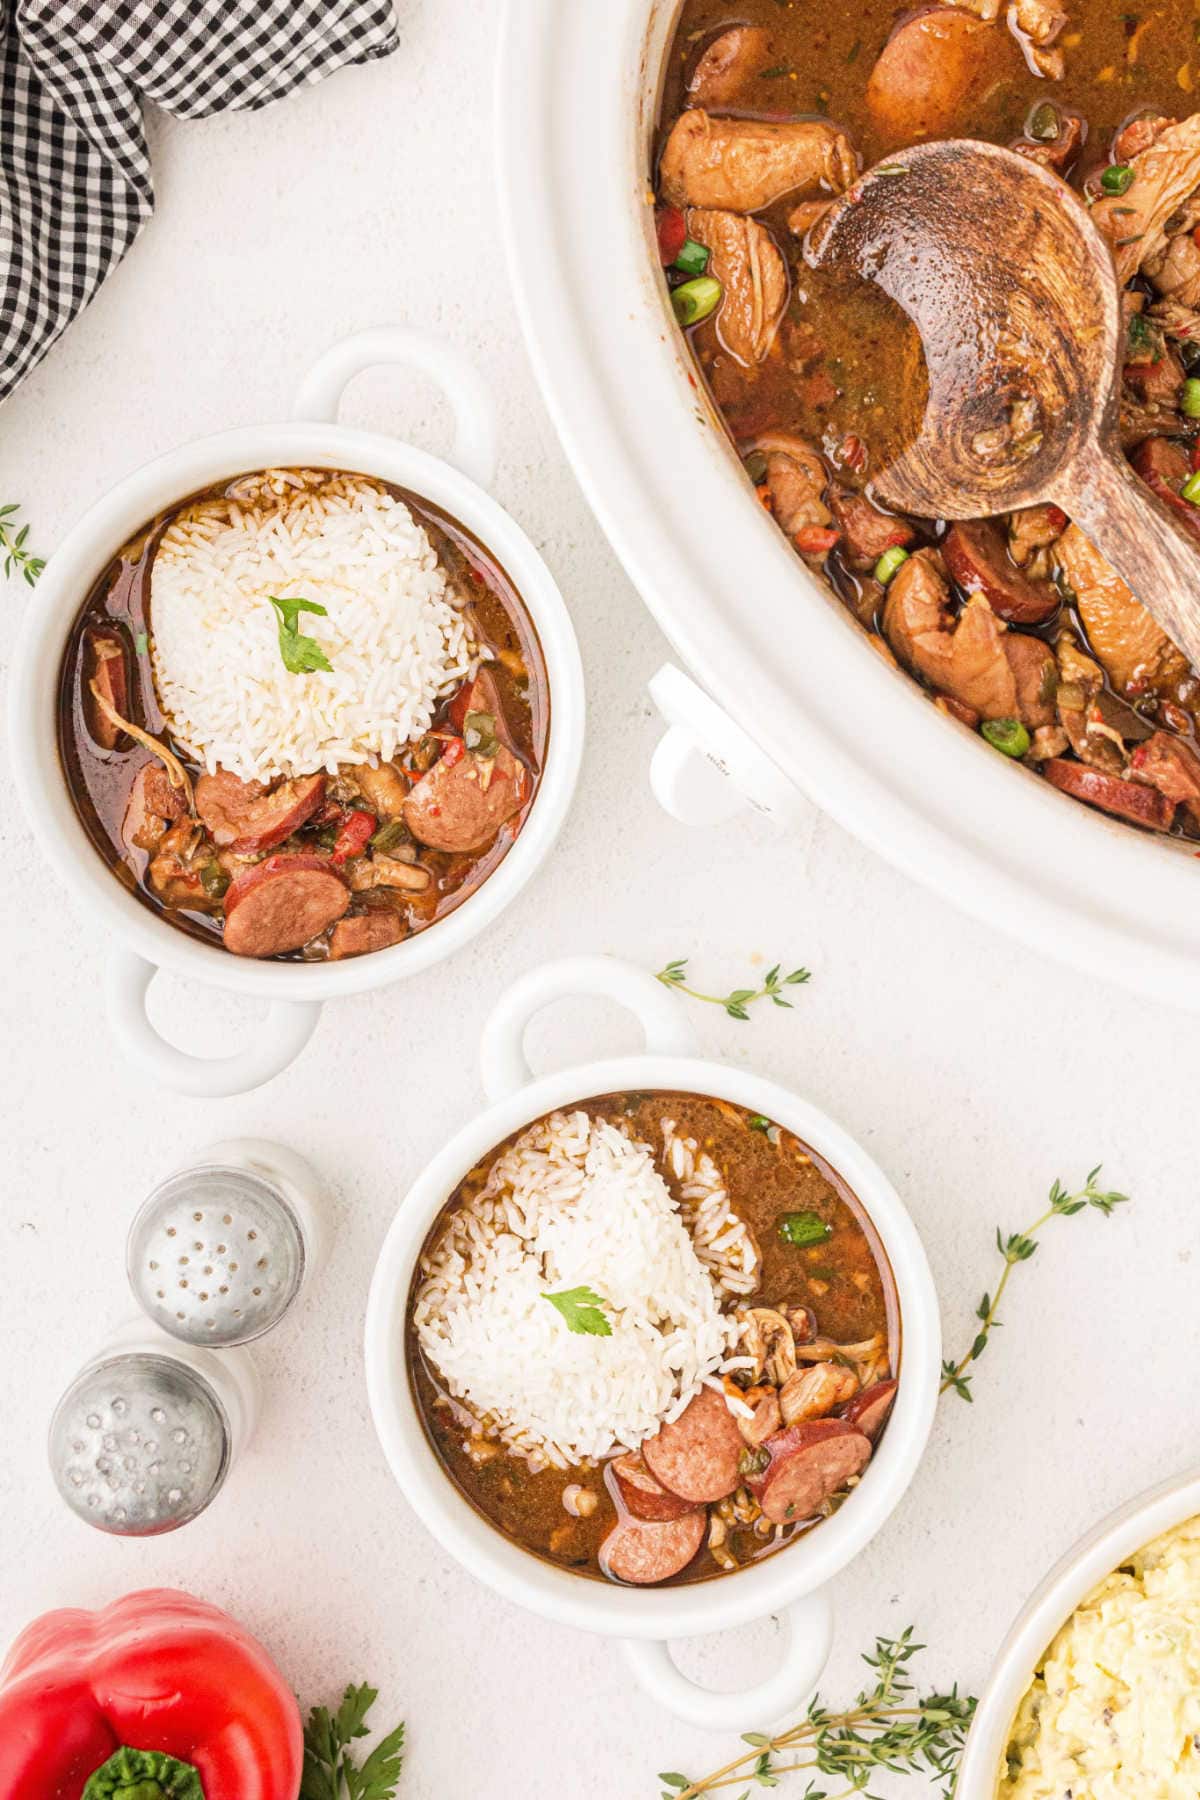 Two bowls of finished gumbo with rice in them.